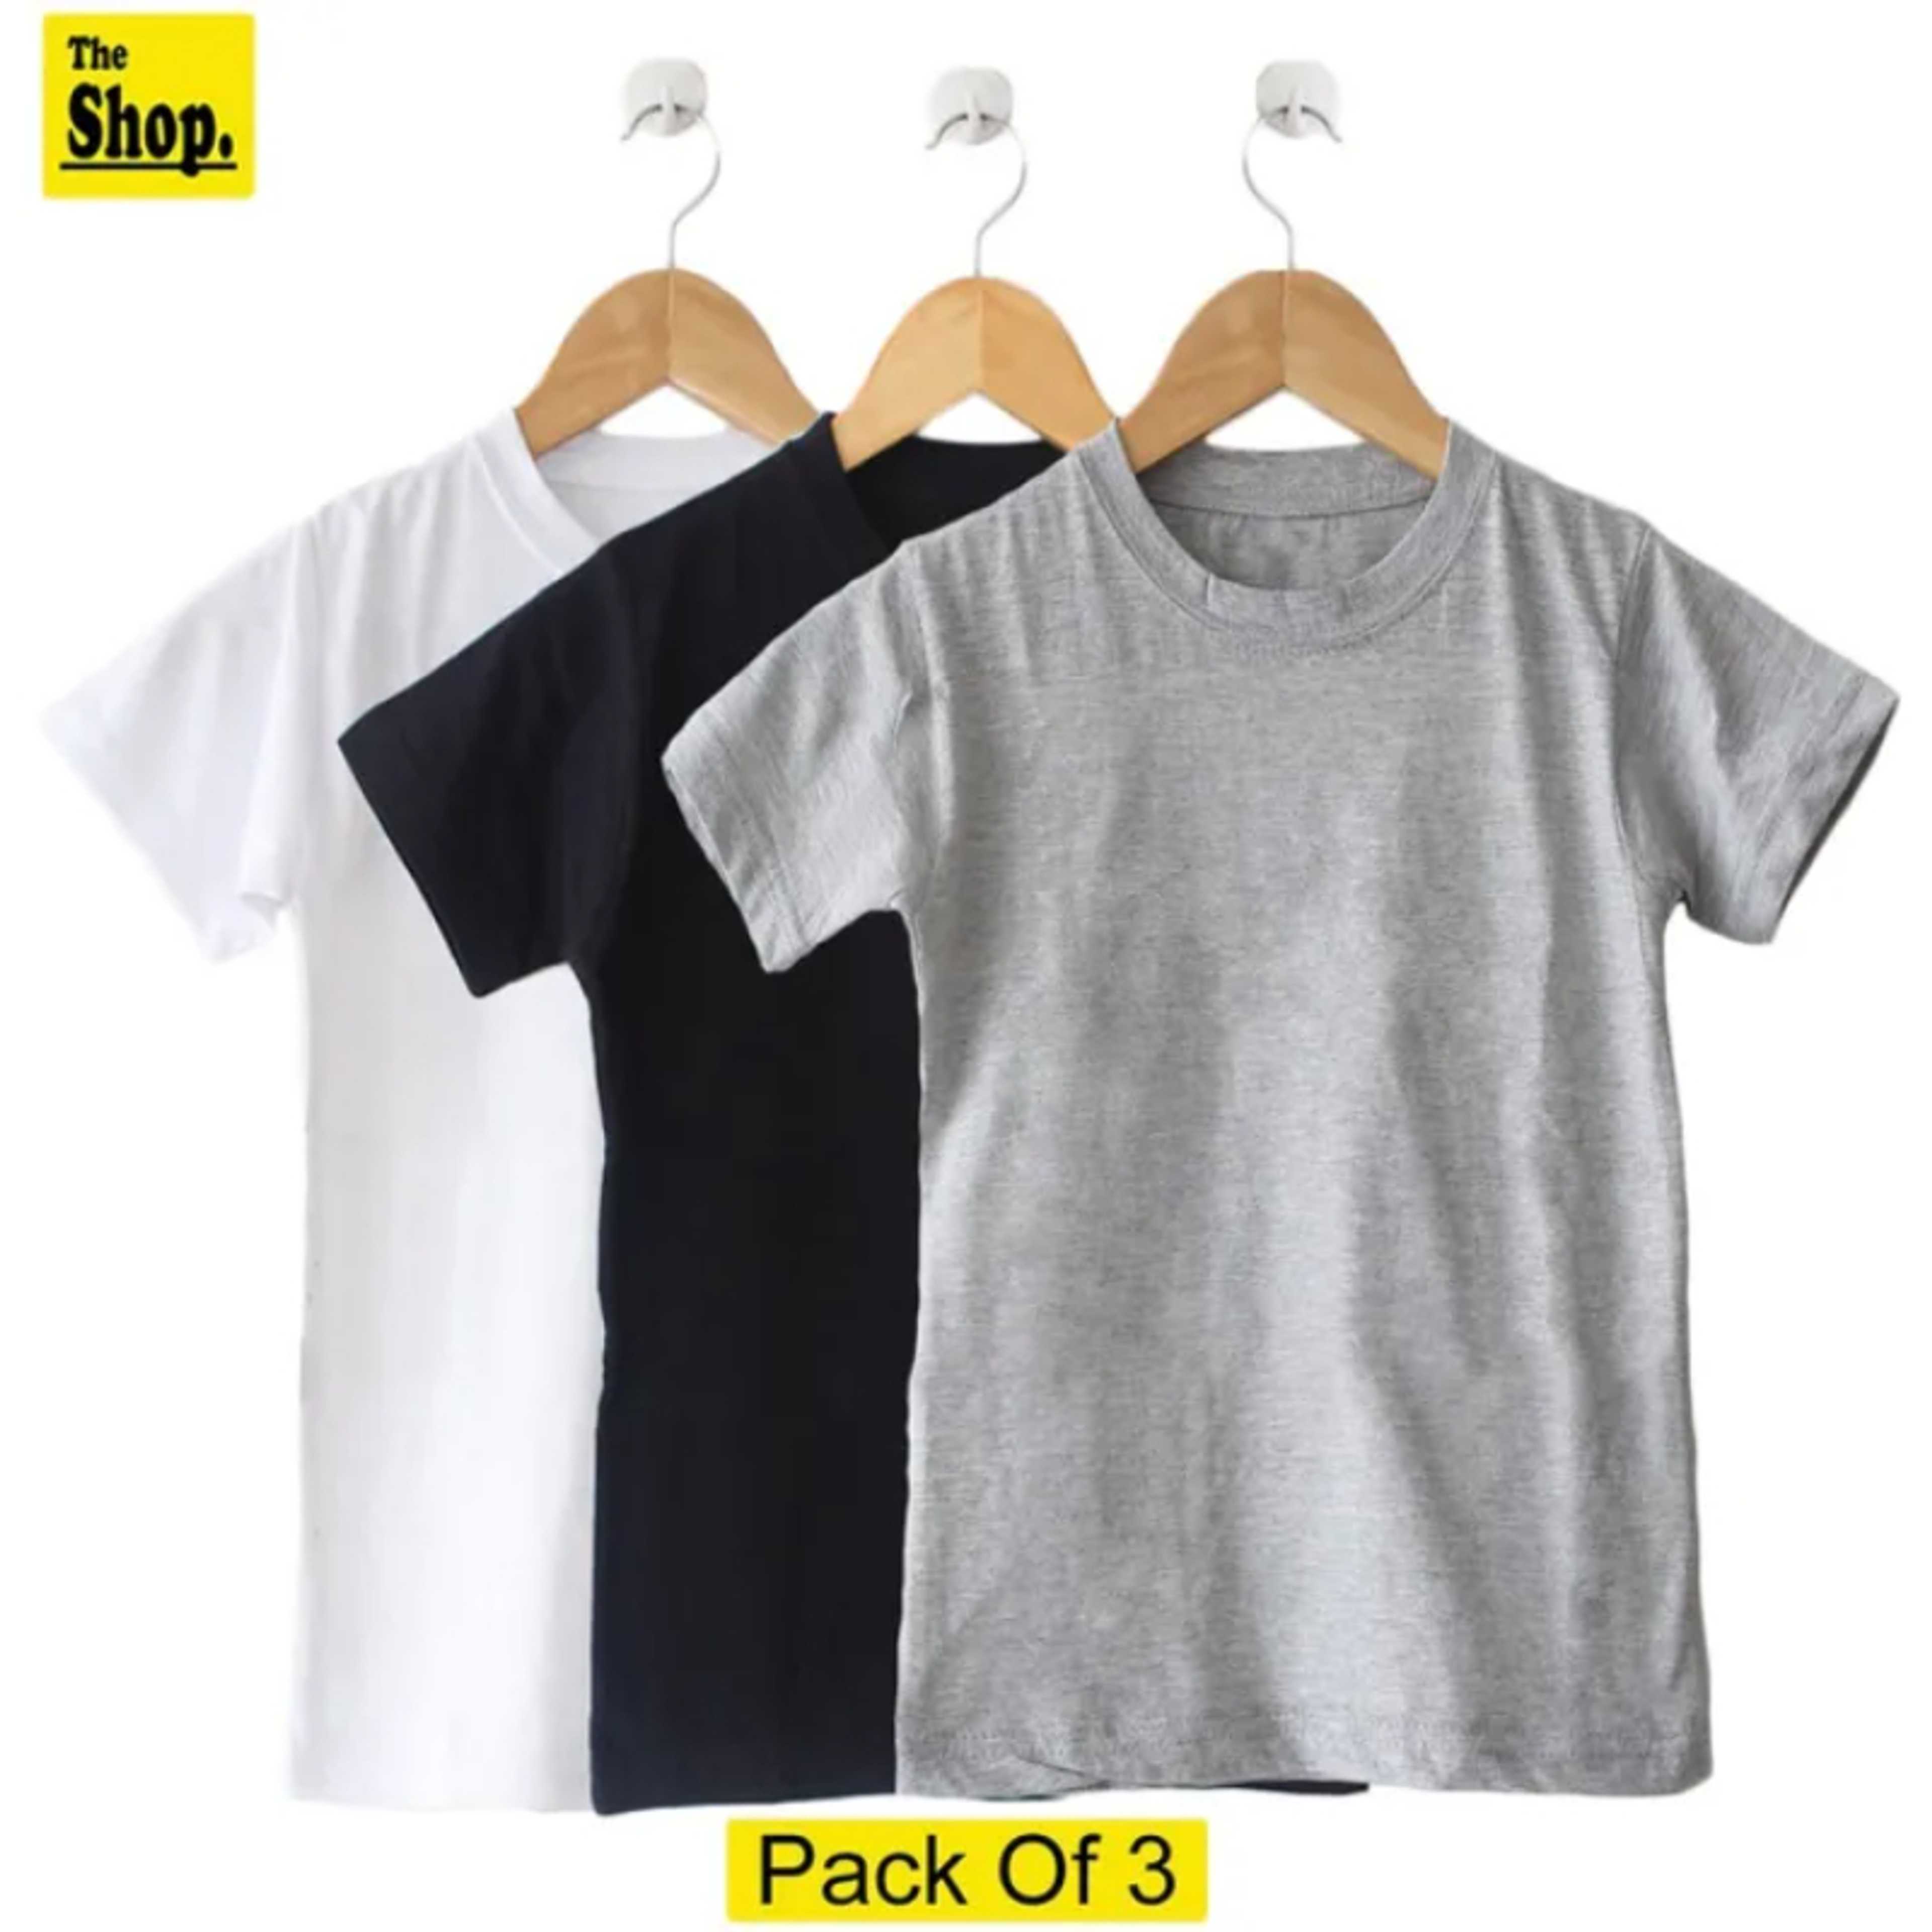 The Shop - White Black & Grey Basic T Shirts For Women - MB-GT3